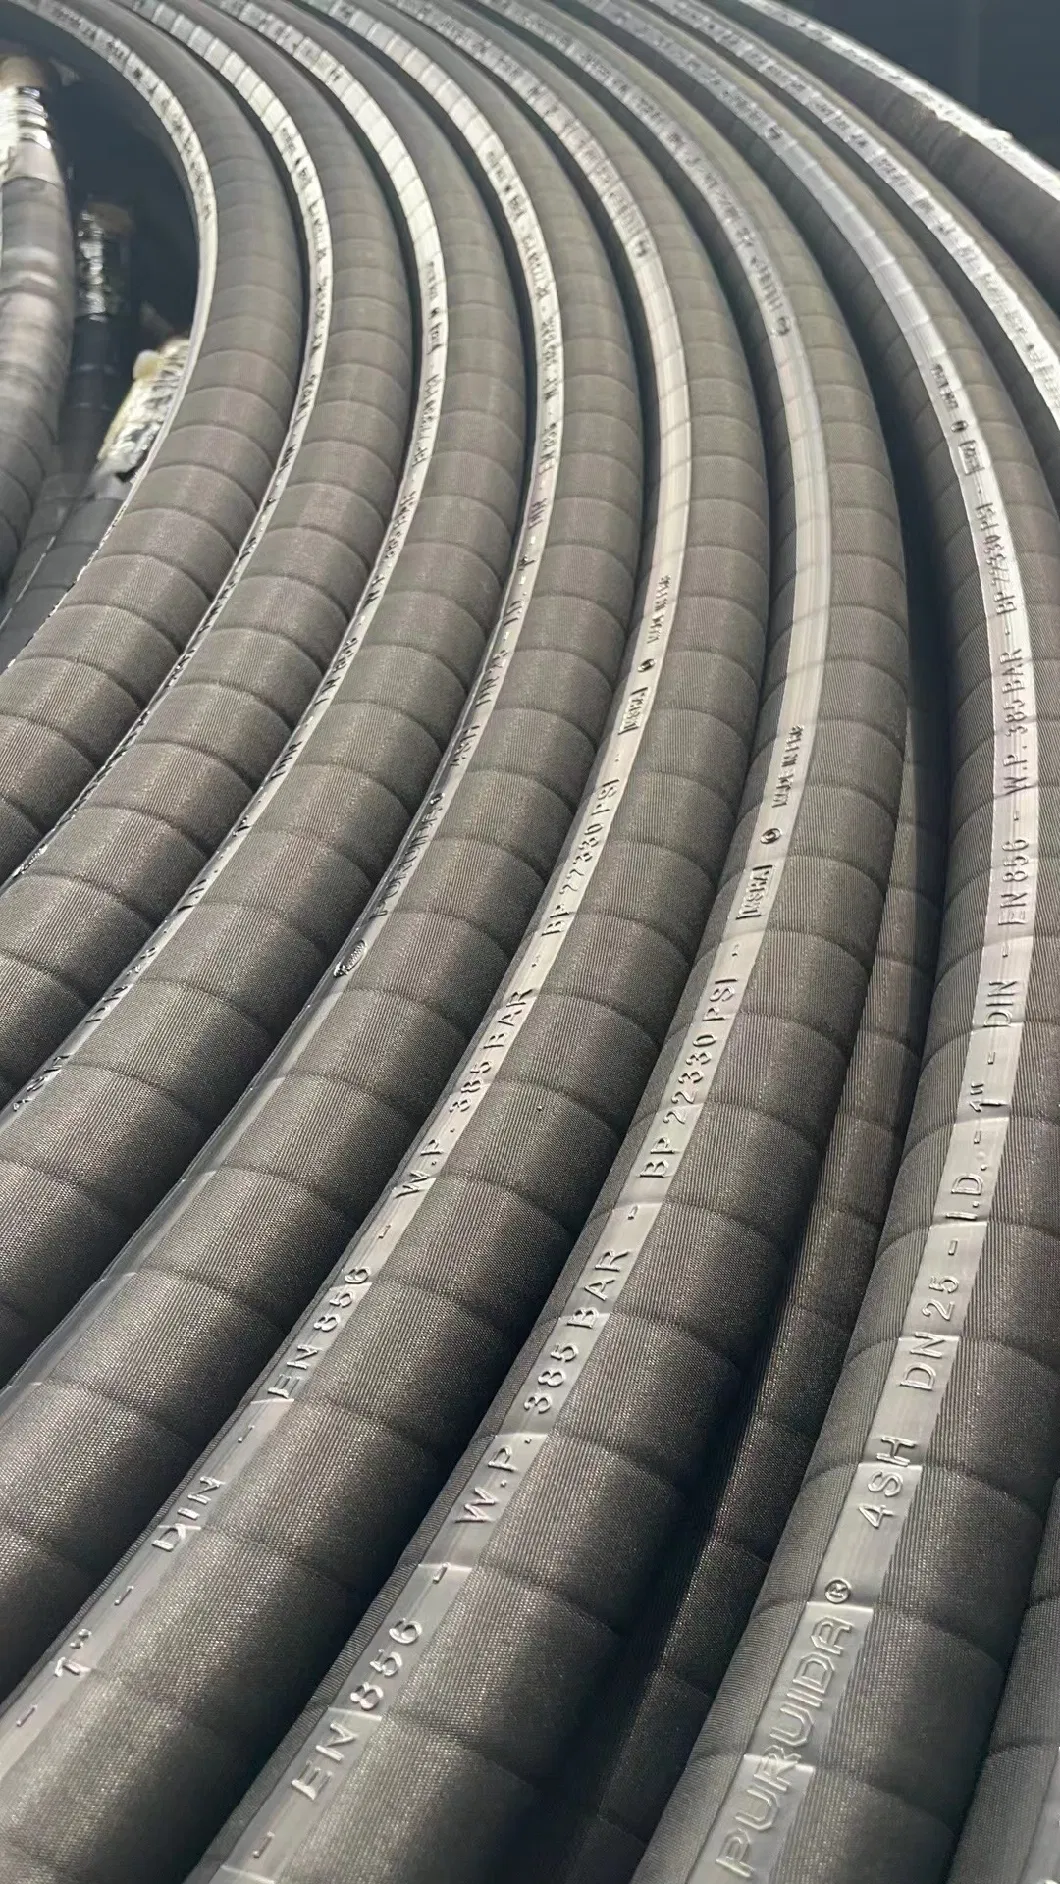 Ageing-Resistant Flexible Rubber Hose Pipe Wear-Resistant Hydraulic Hose Prices Dredge Discharge Rubber Hose